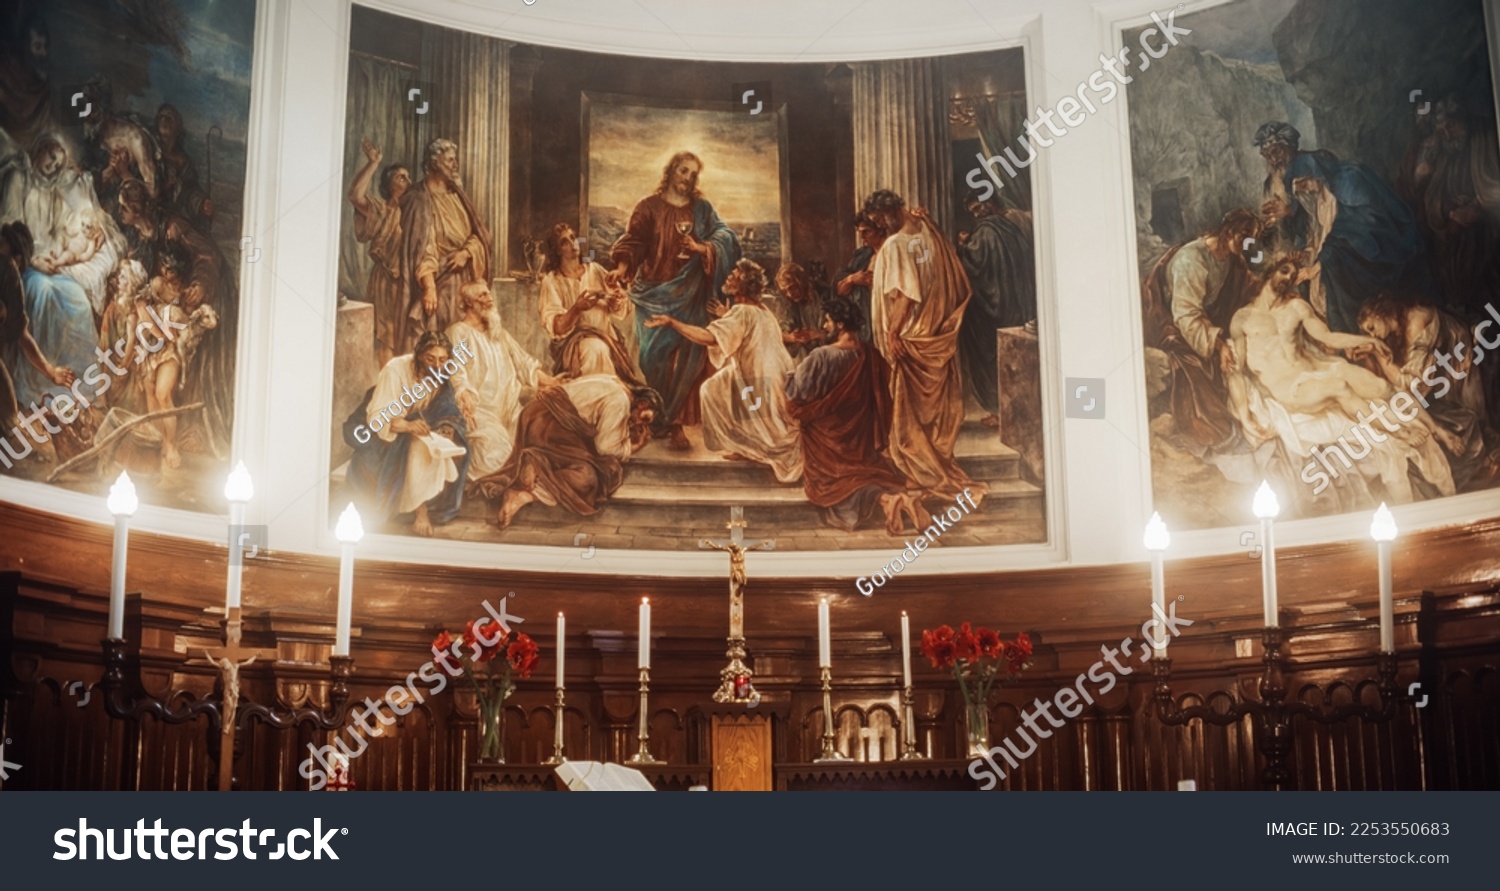 Church Mural Paintings Depicting the Lord Jesus Christ Having the Last Supper with the Disciples and His Death. Images Telling the Christian Stories and Religious Events According to the Holy Bible #2253550683